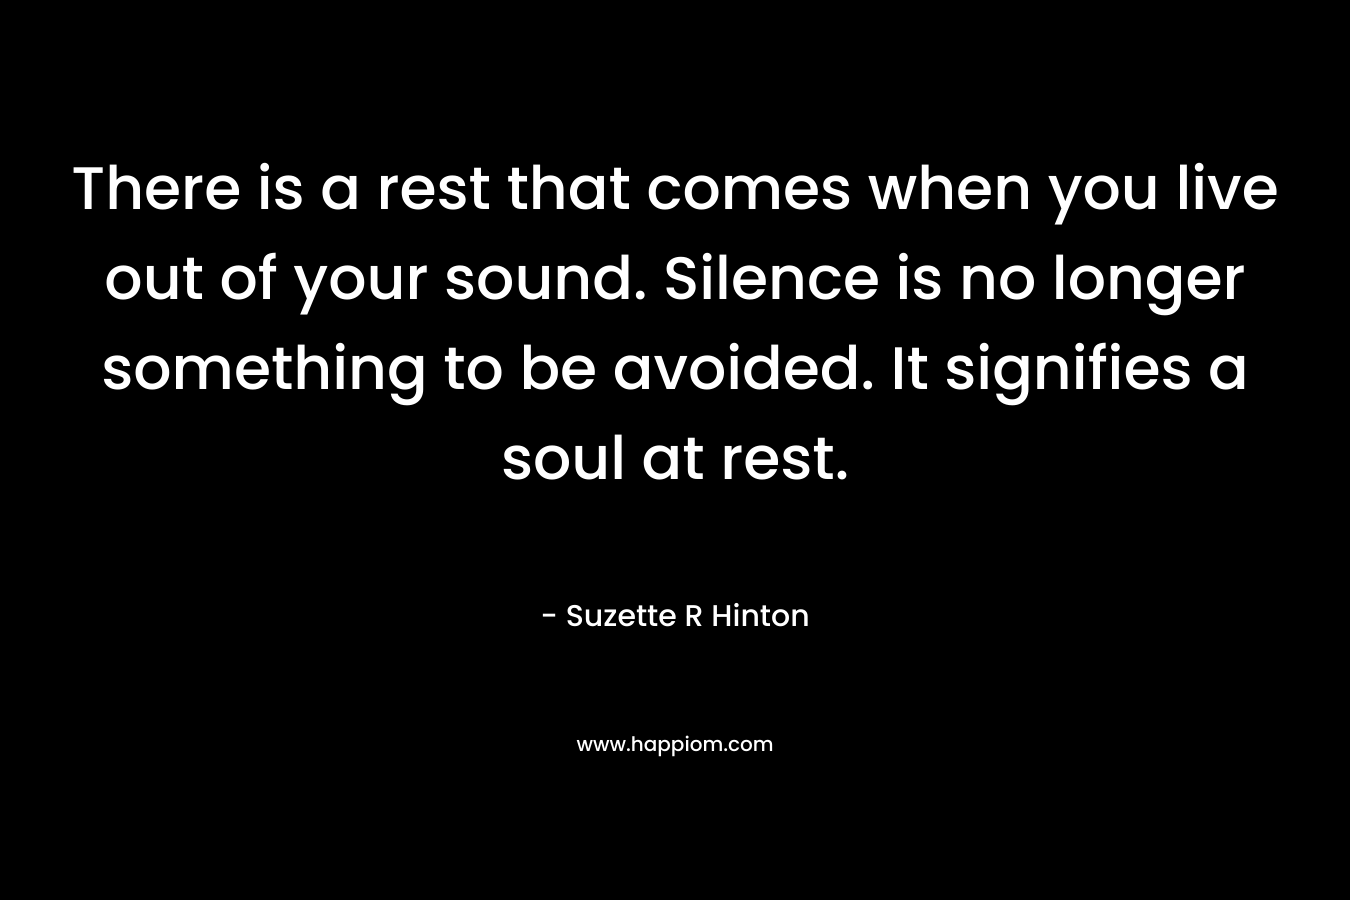 There is a rest that comes when you live out of your sound. Silence is no longer something to be avoided. It signifies a soul at rest. – Suzette R Hinton